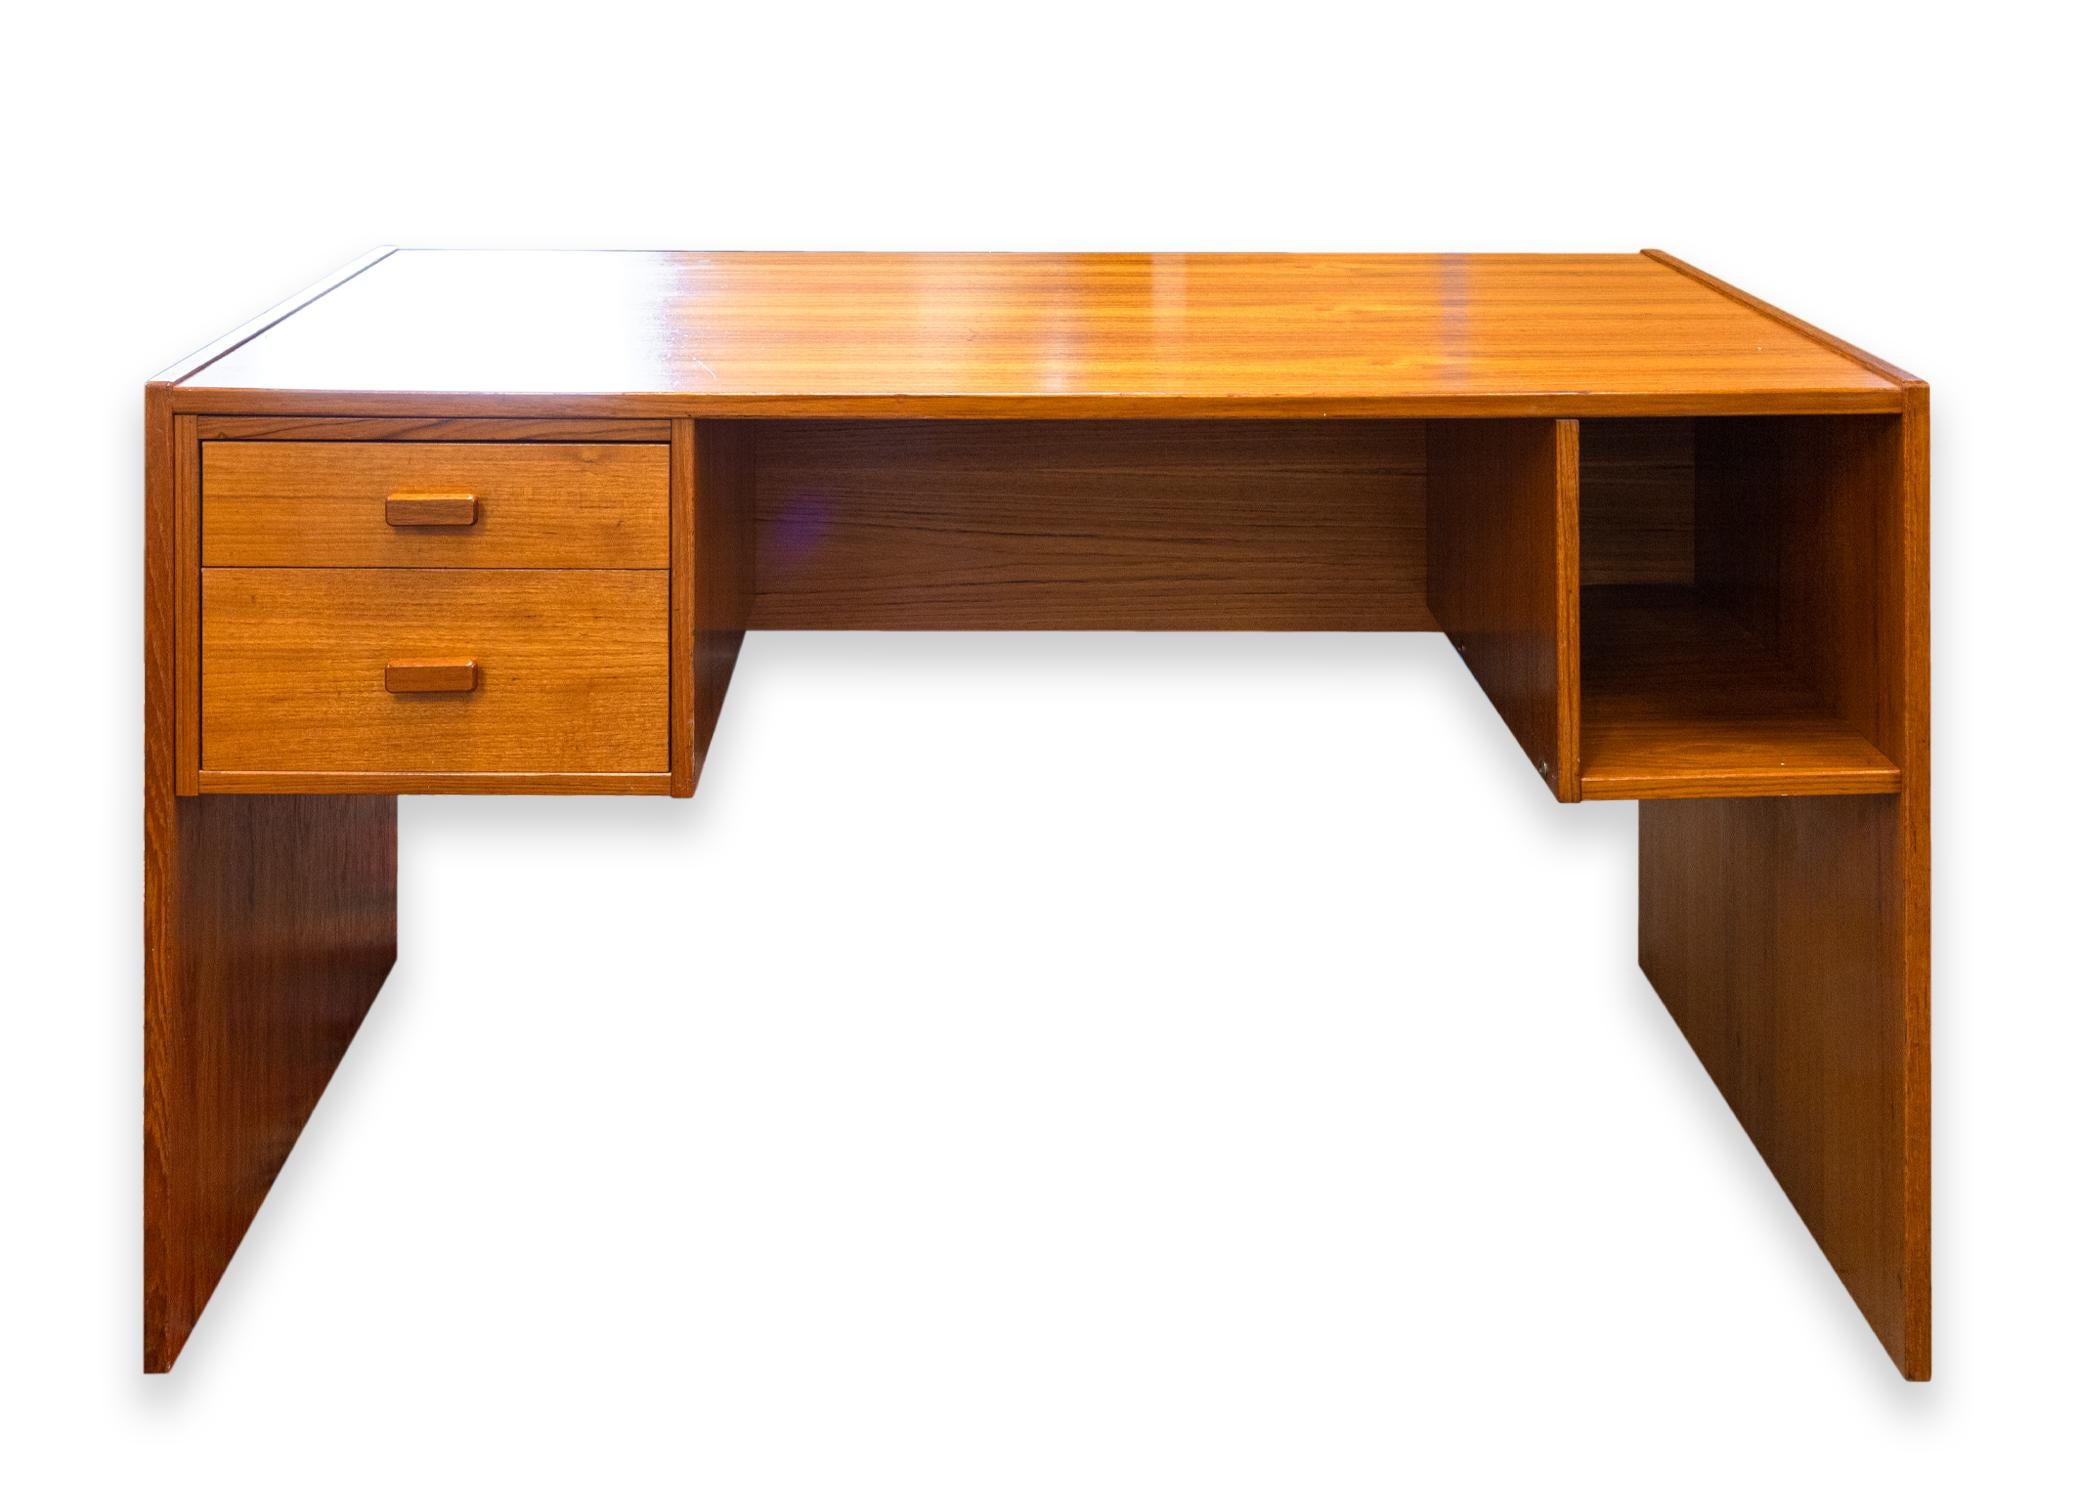 A Danish mid century modern desk by Jesper. A wonderful office desk featuring a full teak wood construction. The wood looks stunning, and is full of rich coloring and beautiful grain patterning. This desk has two pull out drawers on the left side,